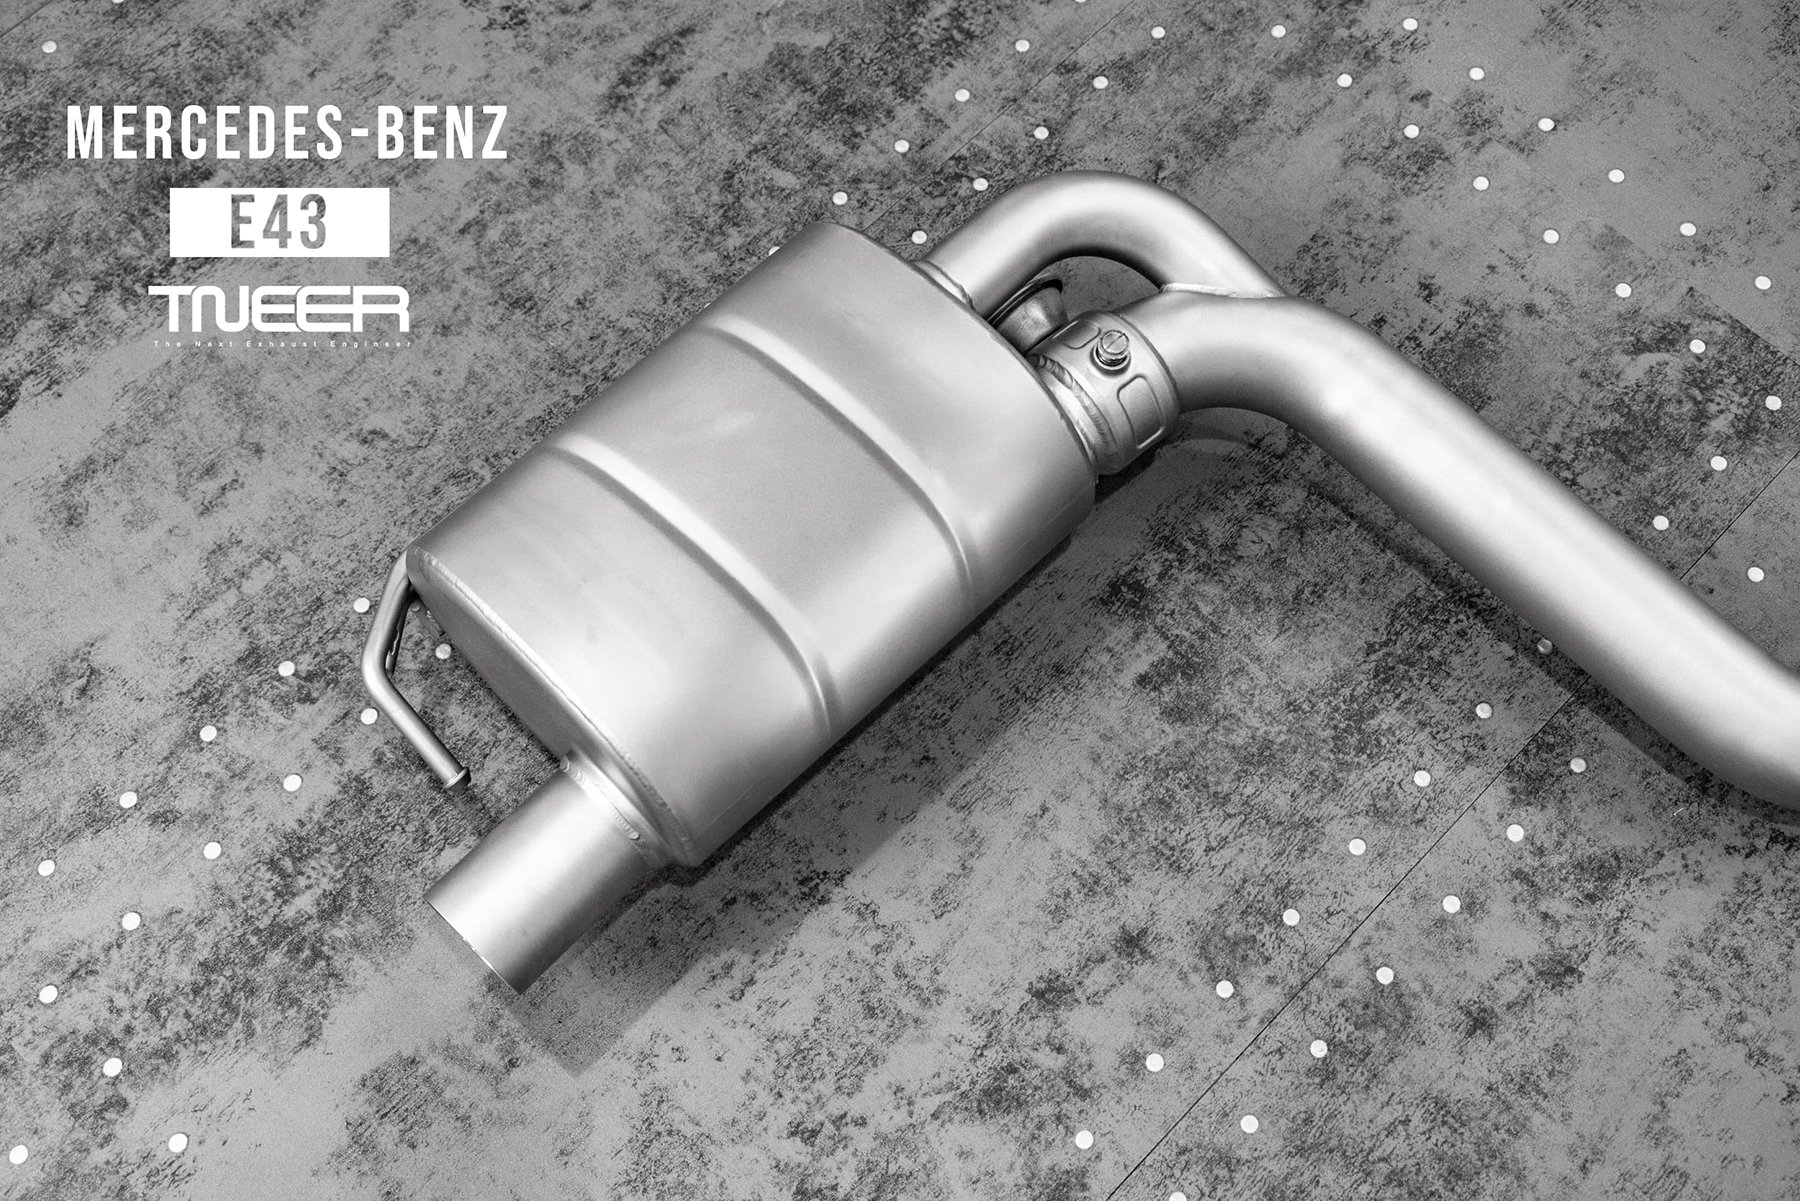 Mercedes-AMG C238 E43 Coupe TNEER Performance Exhaust System